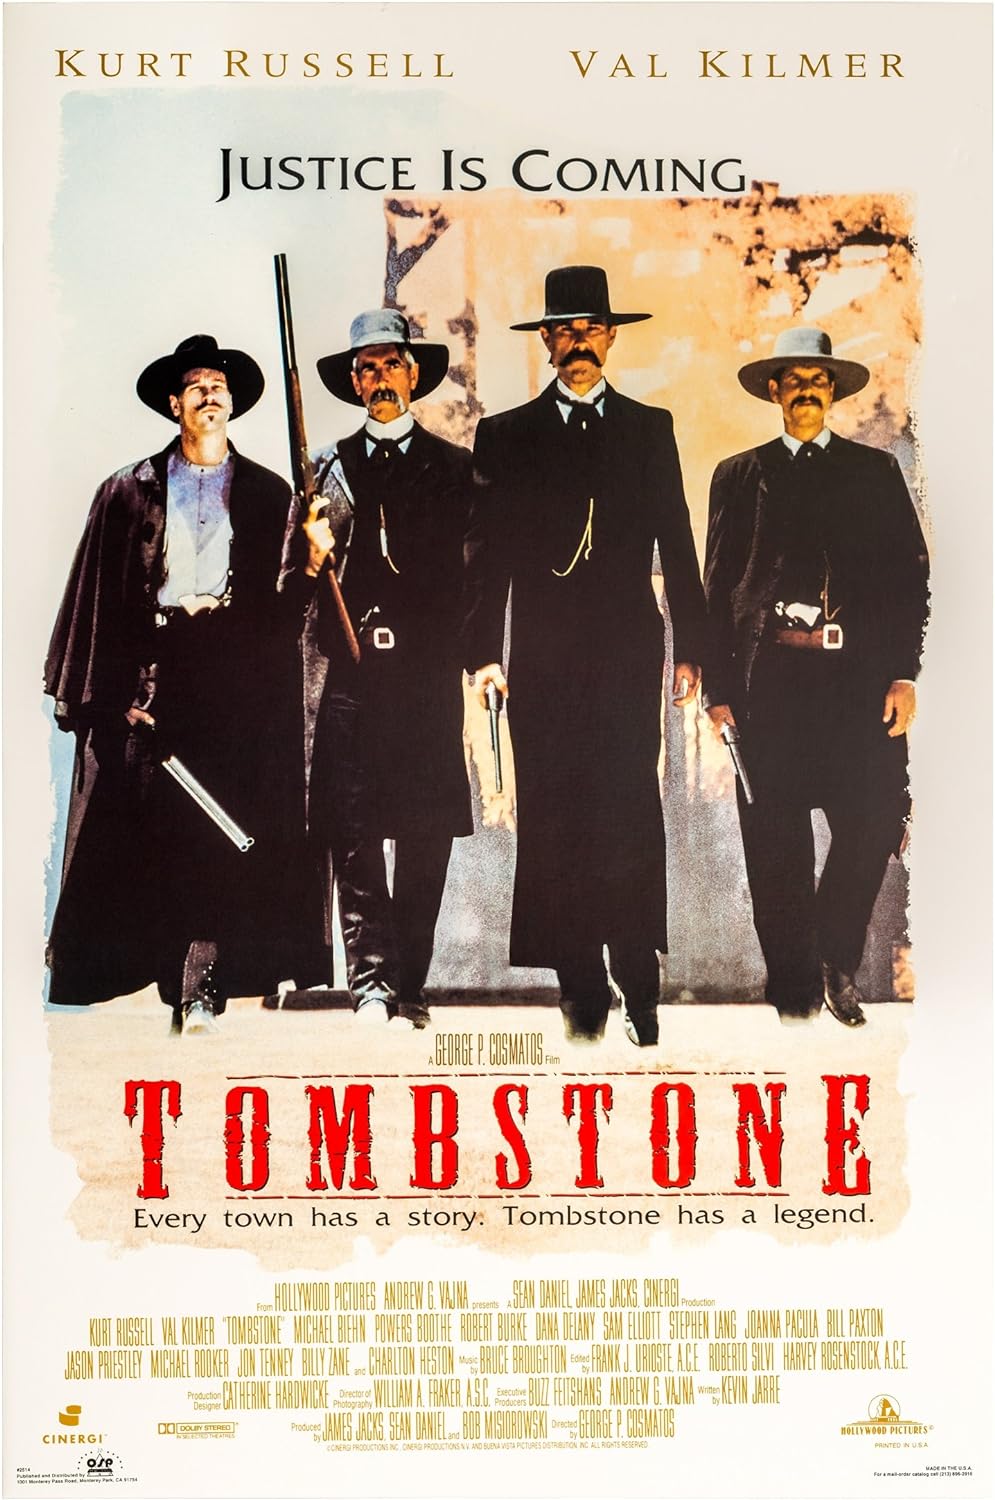 Tombstone movie poster